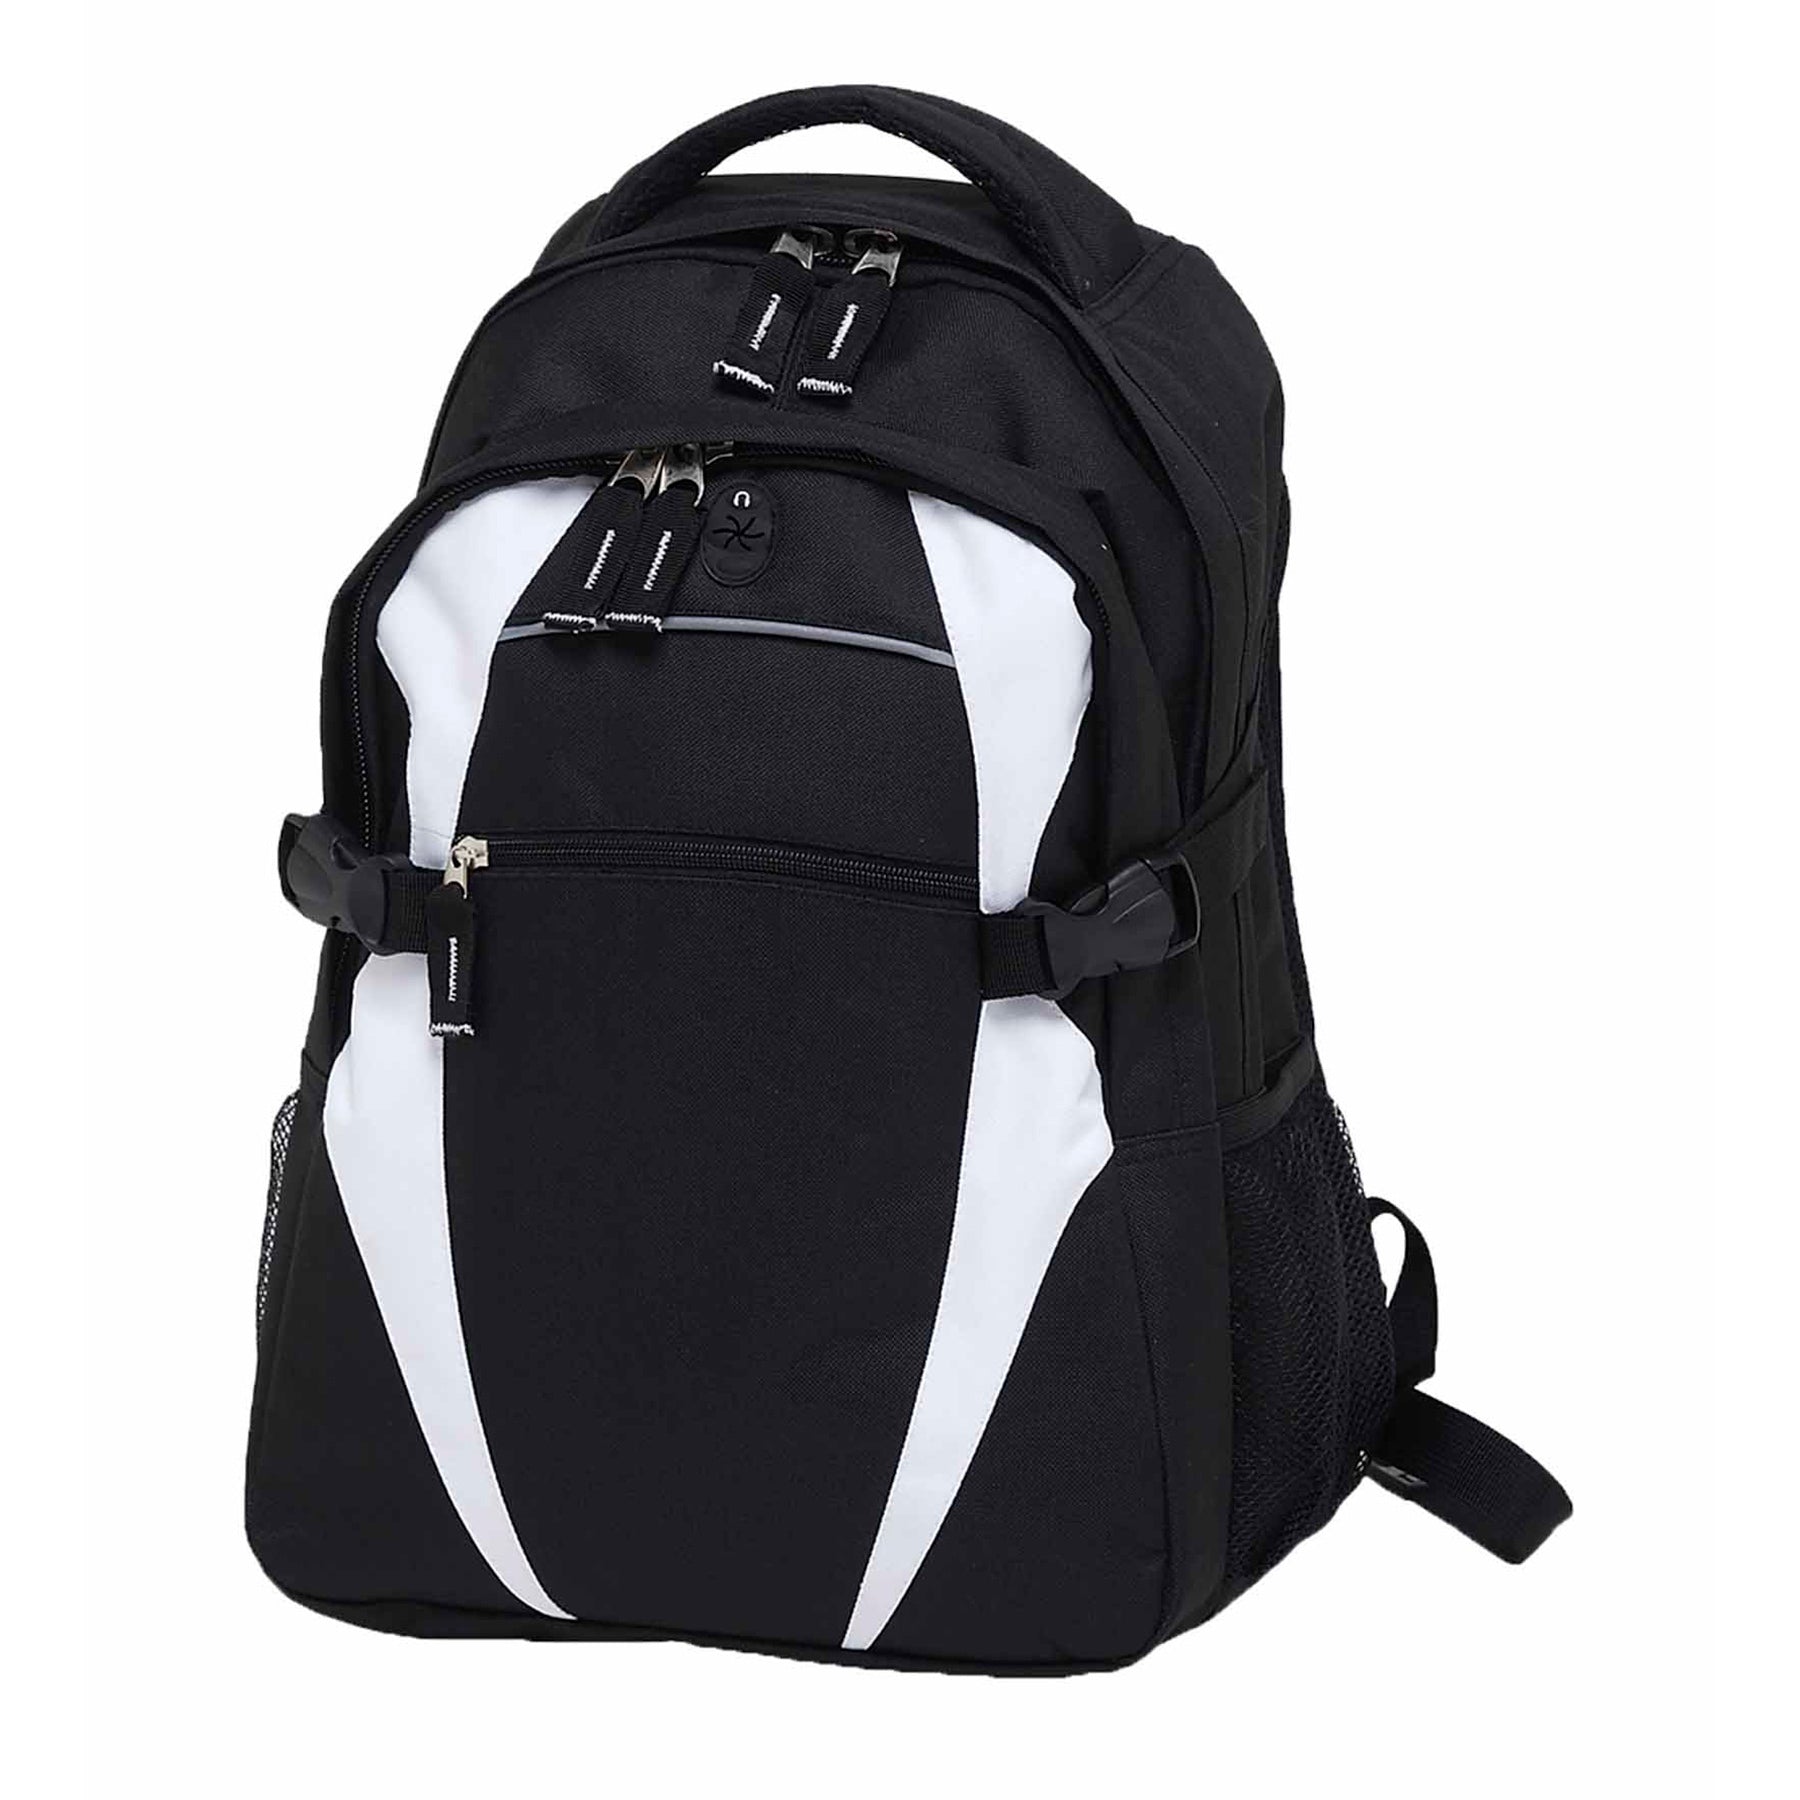 House of Uniforms The Spliced Zenith Backpack Gear for Life Black/White